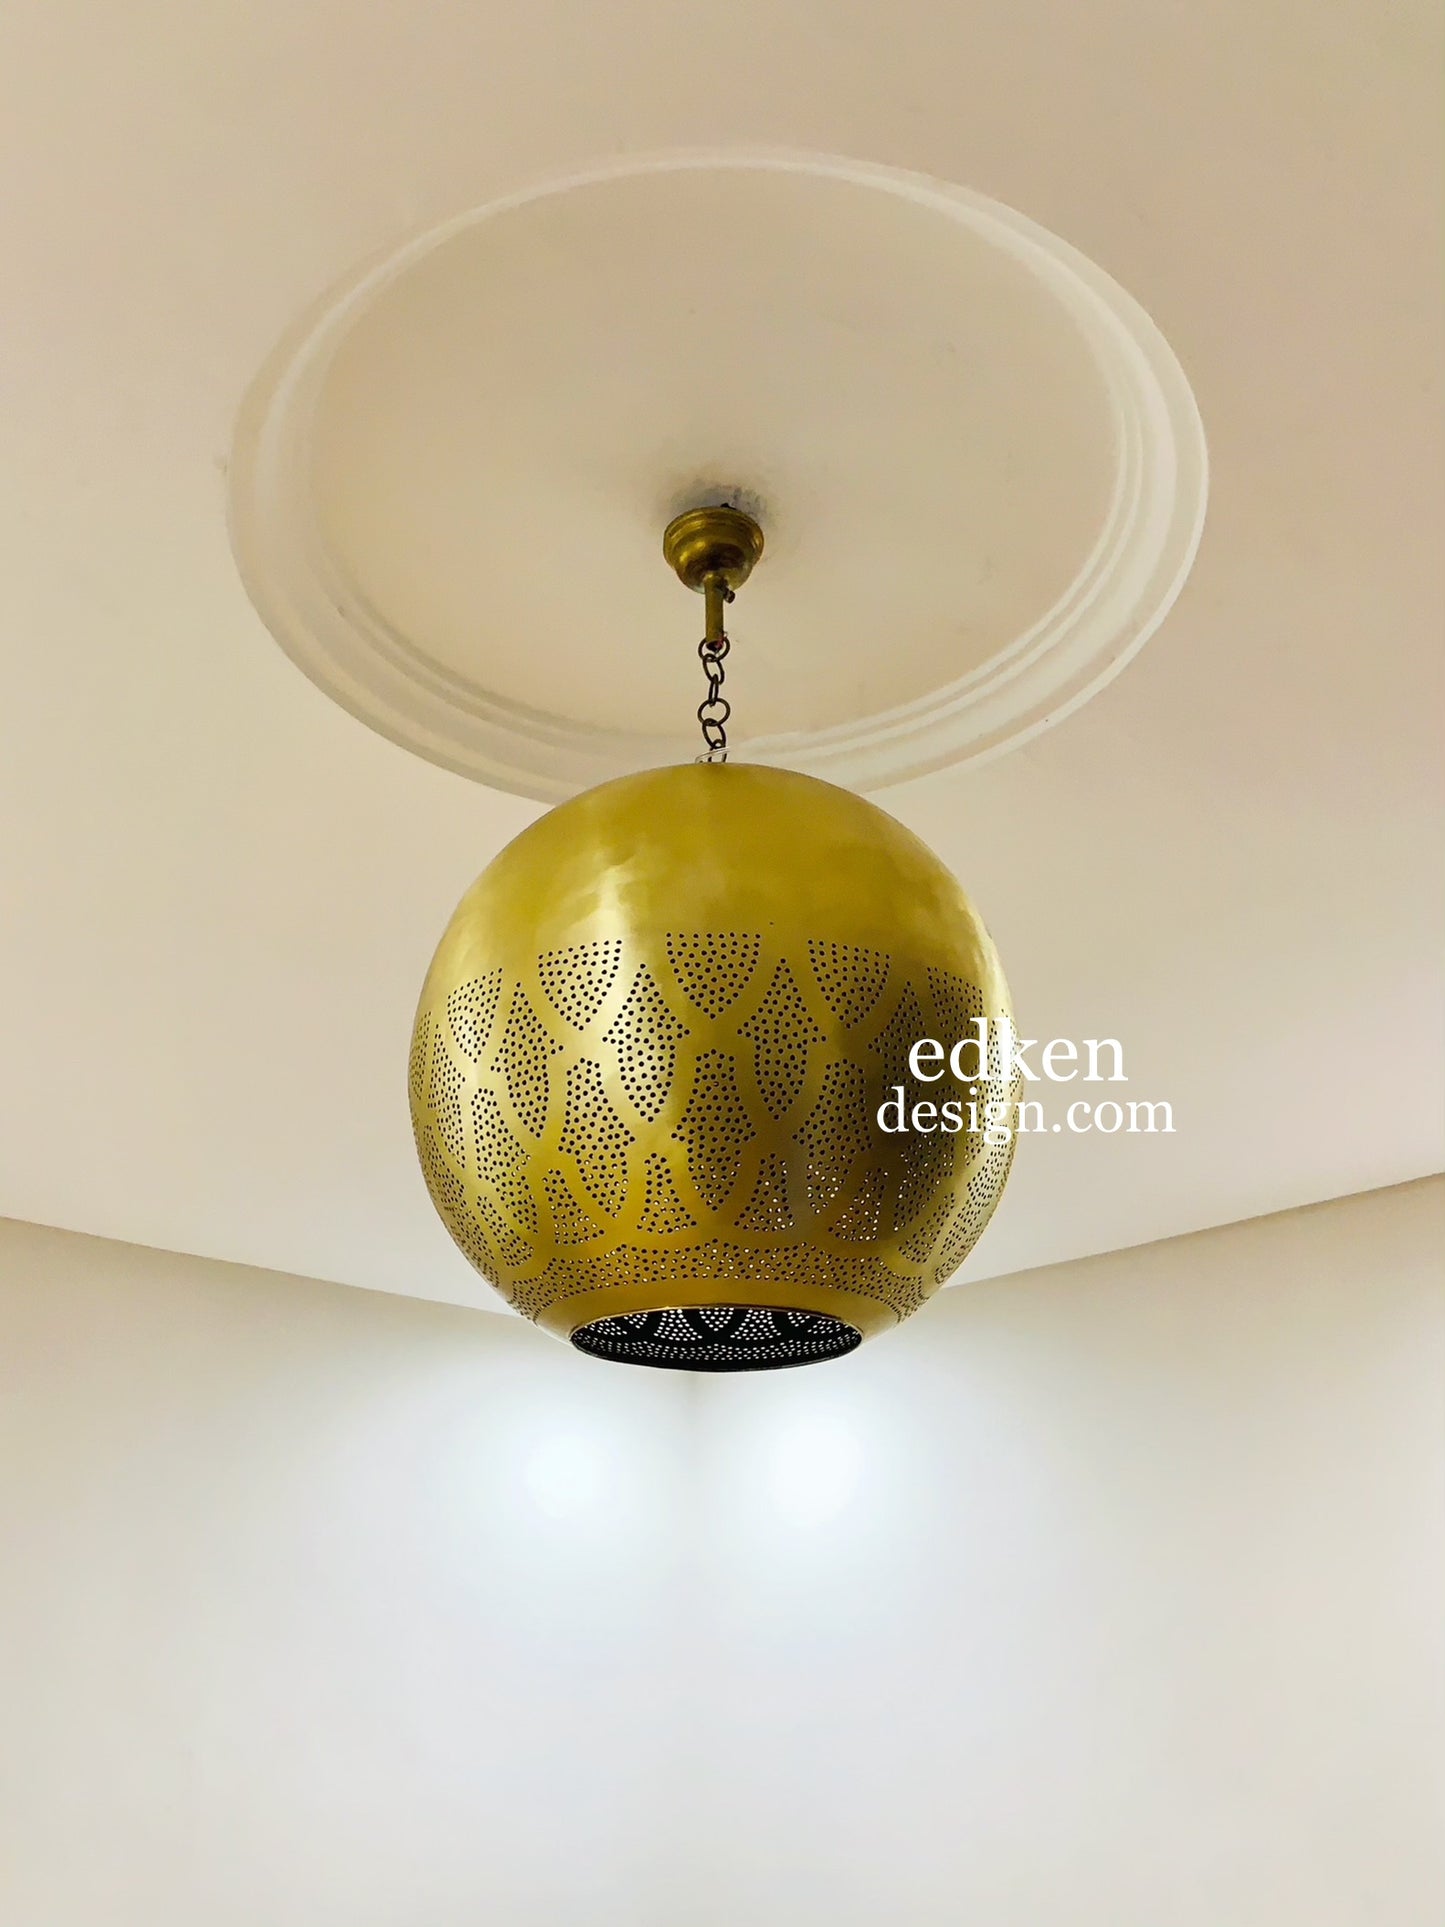 EDKEN LIGHTS - Switched Off Morocco Ceiling Lamp Shades Globe Shape Fixture Ball pierced Hanging Brass Lights 